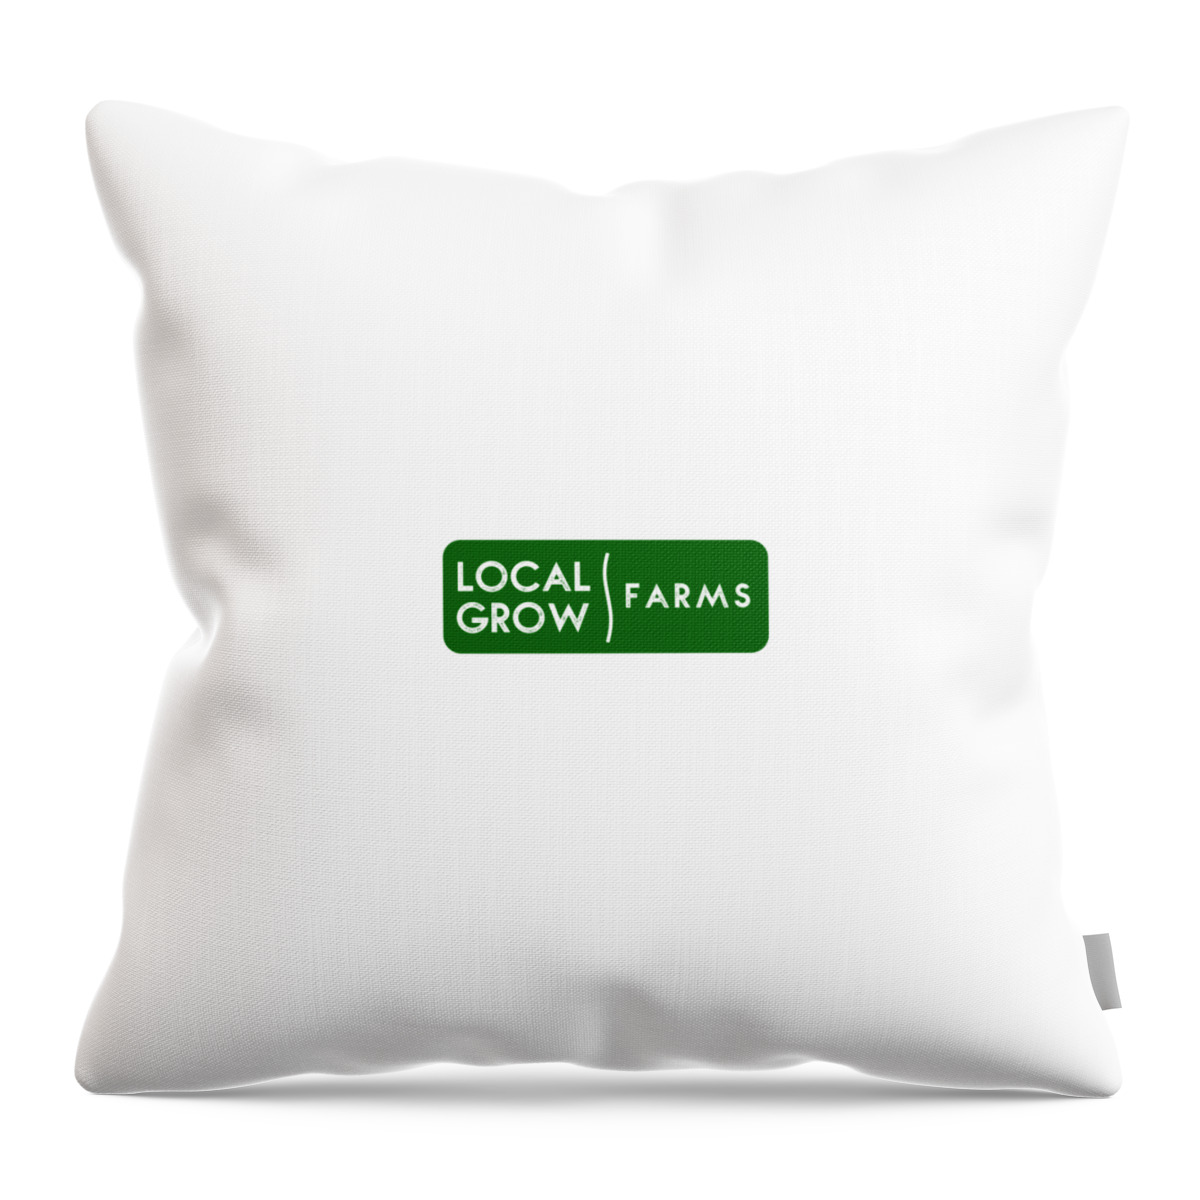  Throw Pillow featuring the drawing Local Grow Farms logo on light backgrounds by Charlie Szoradi